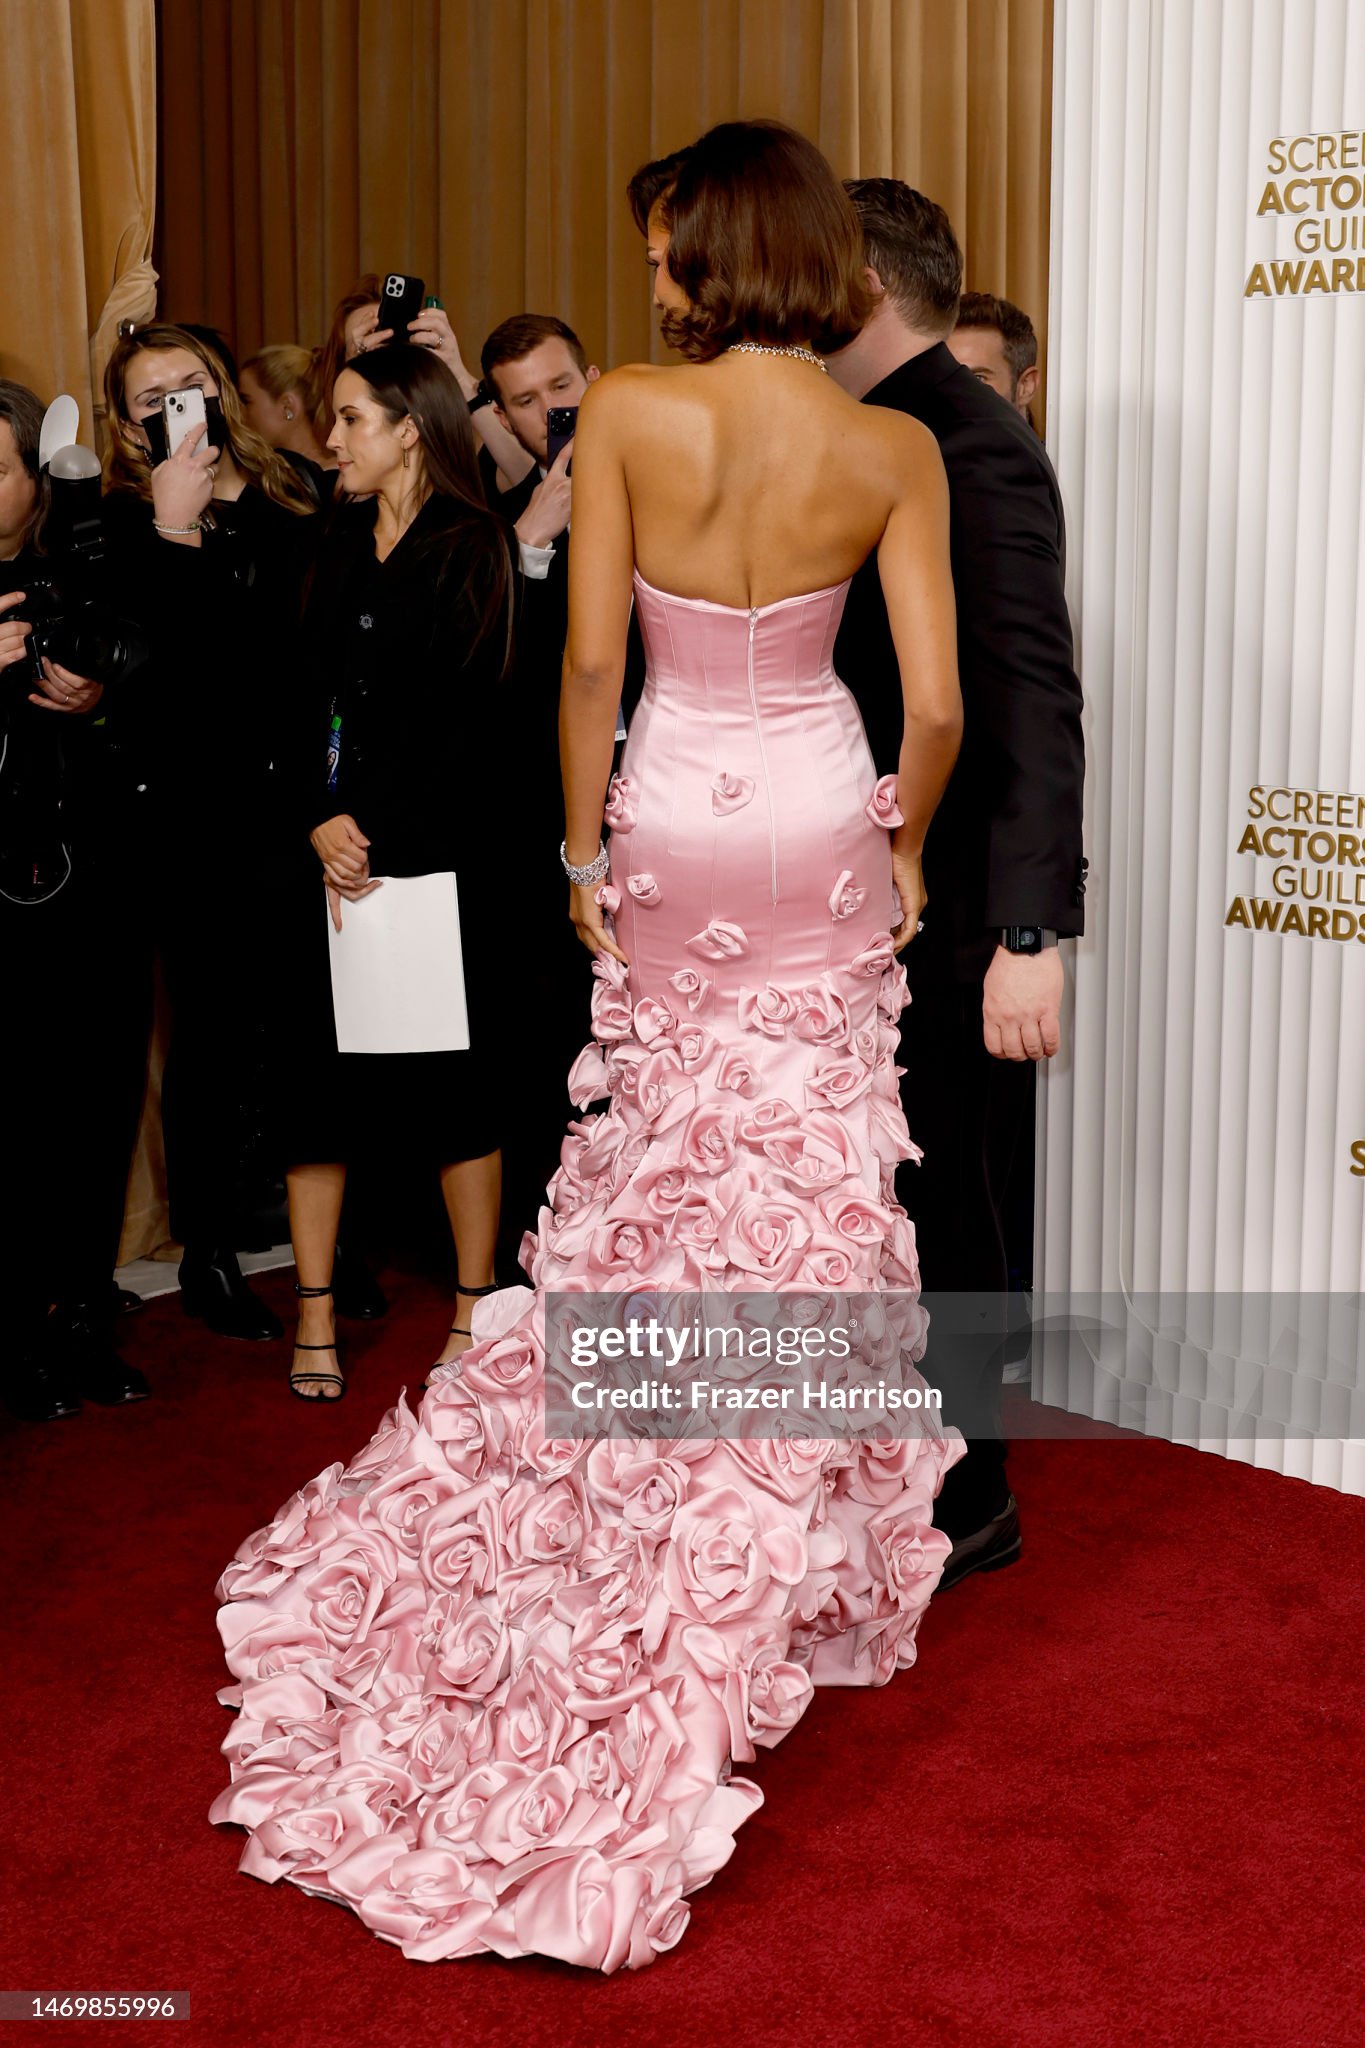 zendaya-attends-the-29th-annual-screen-actors-guild-awards-at-fairmont-century-plaza-on.jpg